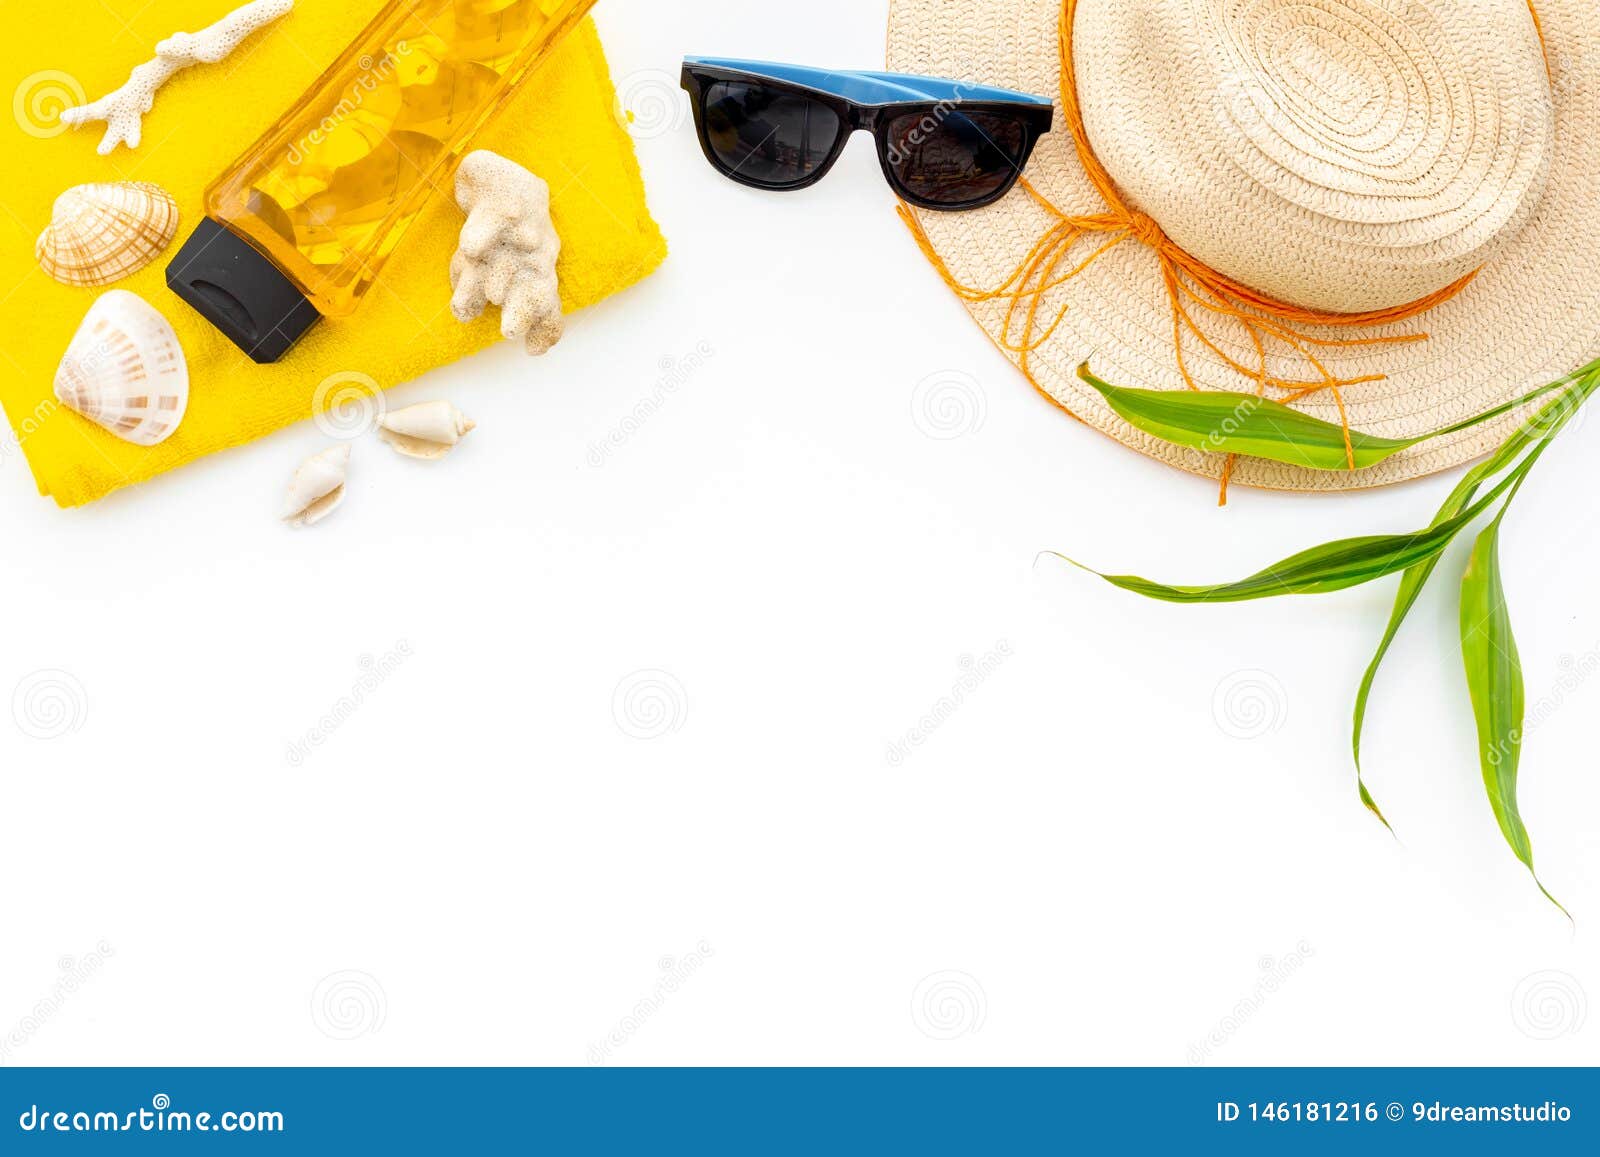 Summer Travaling To the Sea with Straw Hat, Sun Glasses, Sunblock ...